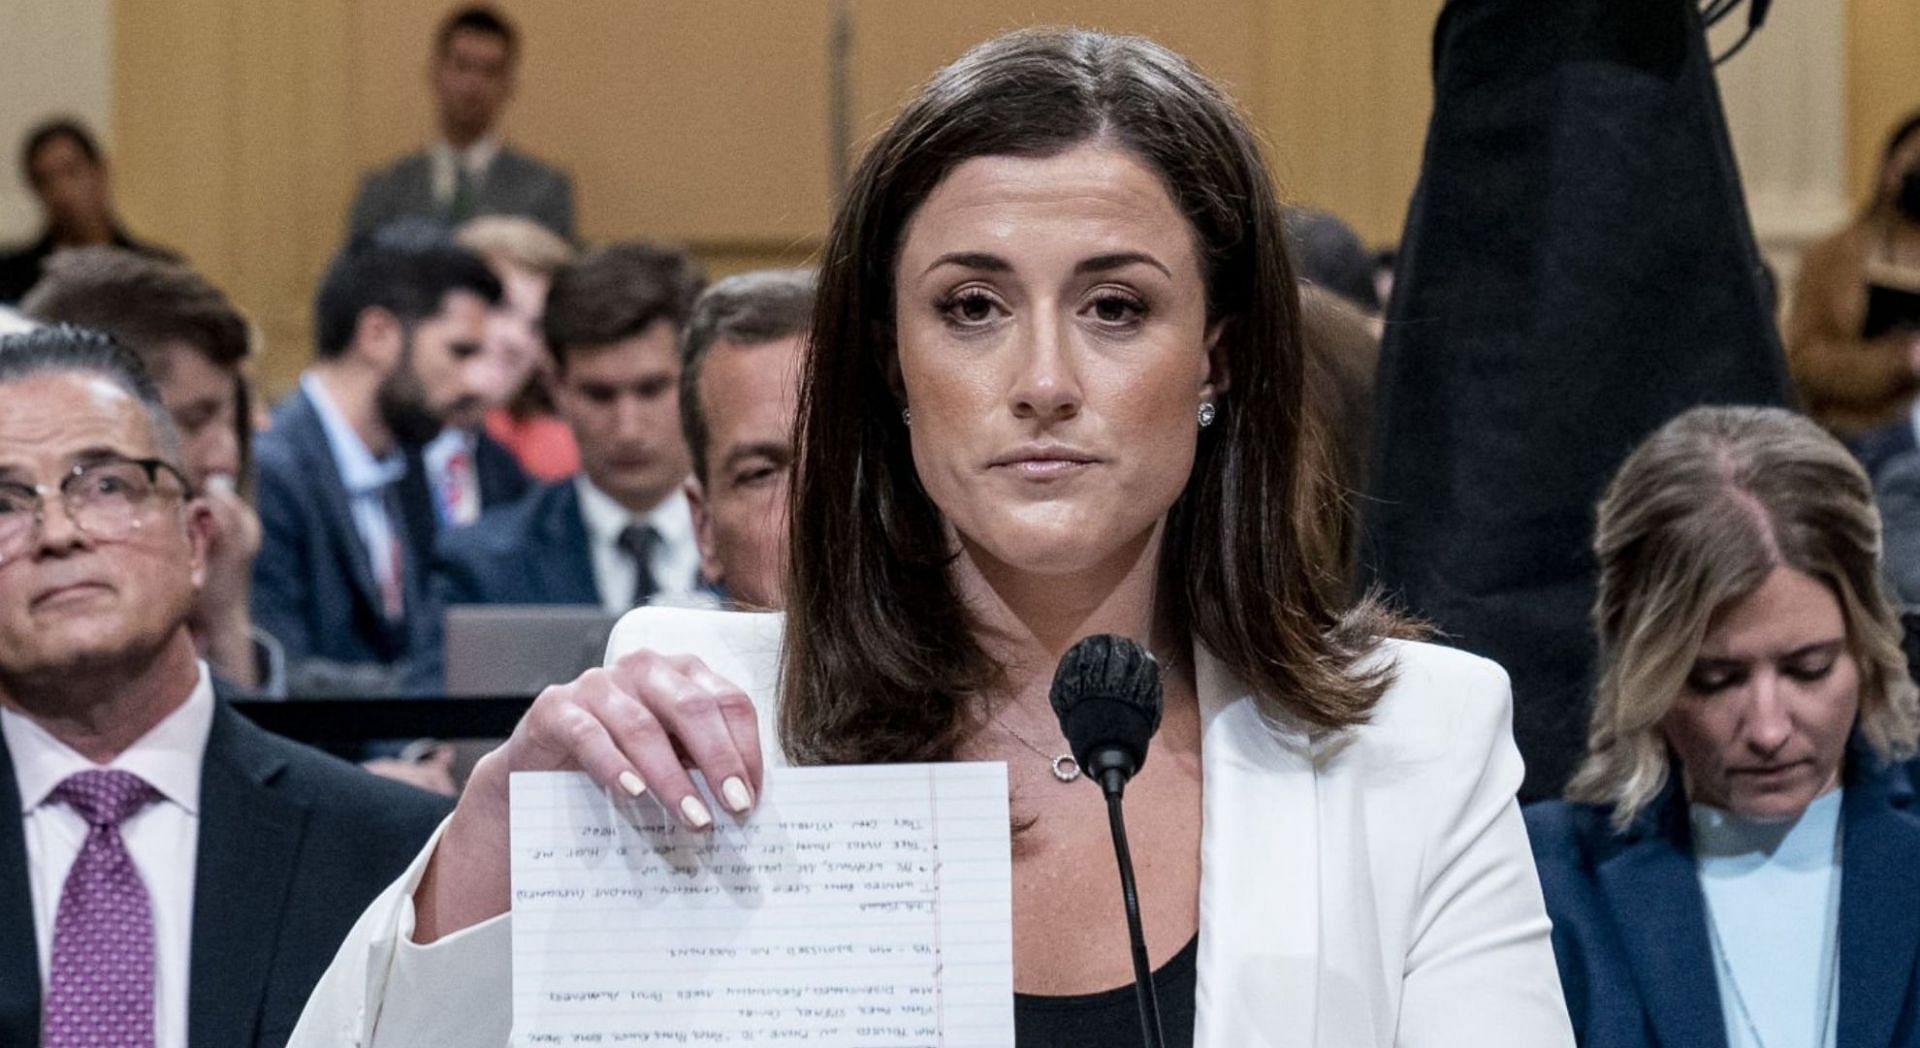 “she Better Be Protected Well” Explosive Cassidy Hutchinson Transcript Goes Viral In Wake Of